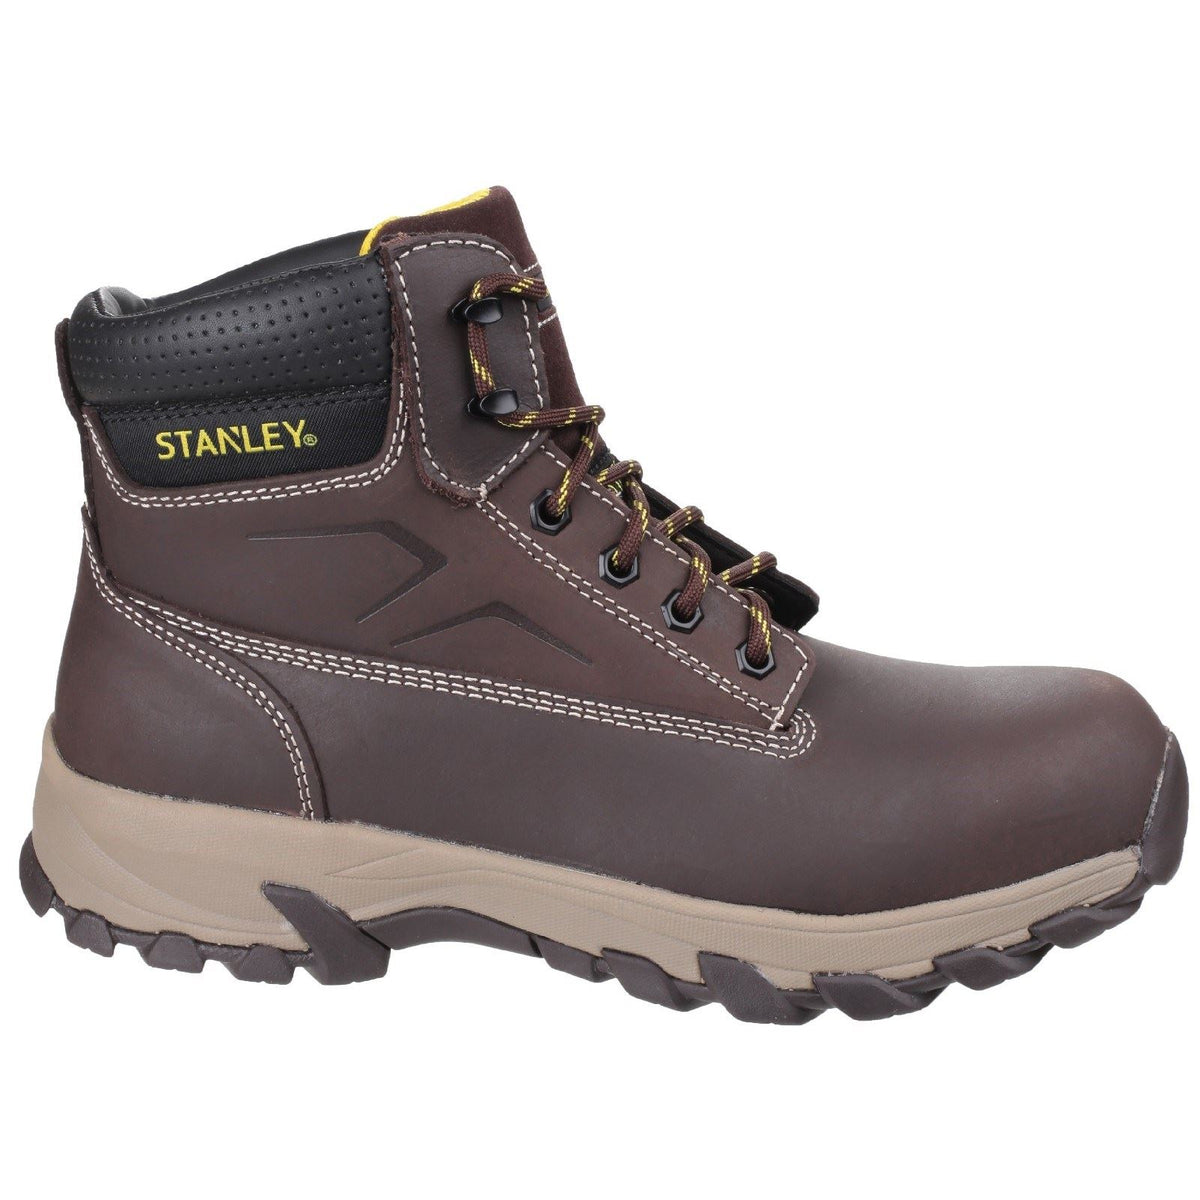 Stanley Tradesman Safety Boots STA10025-104